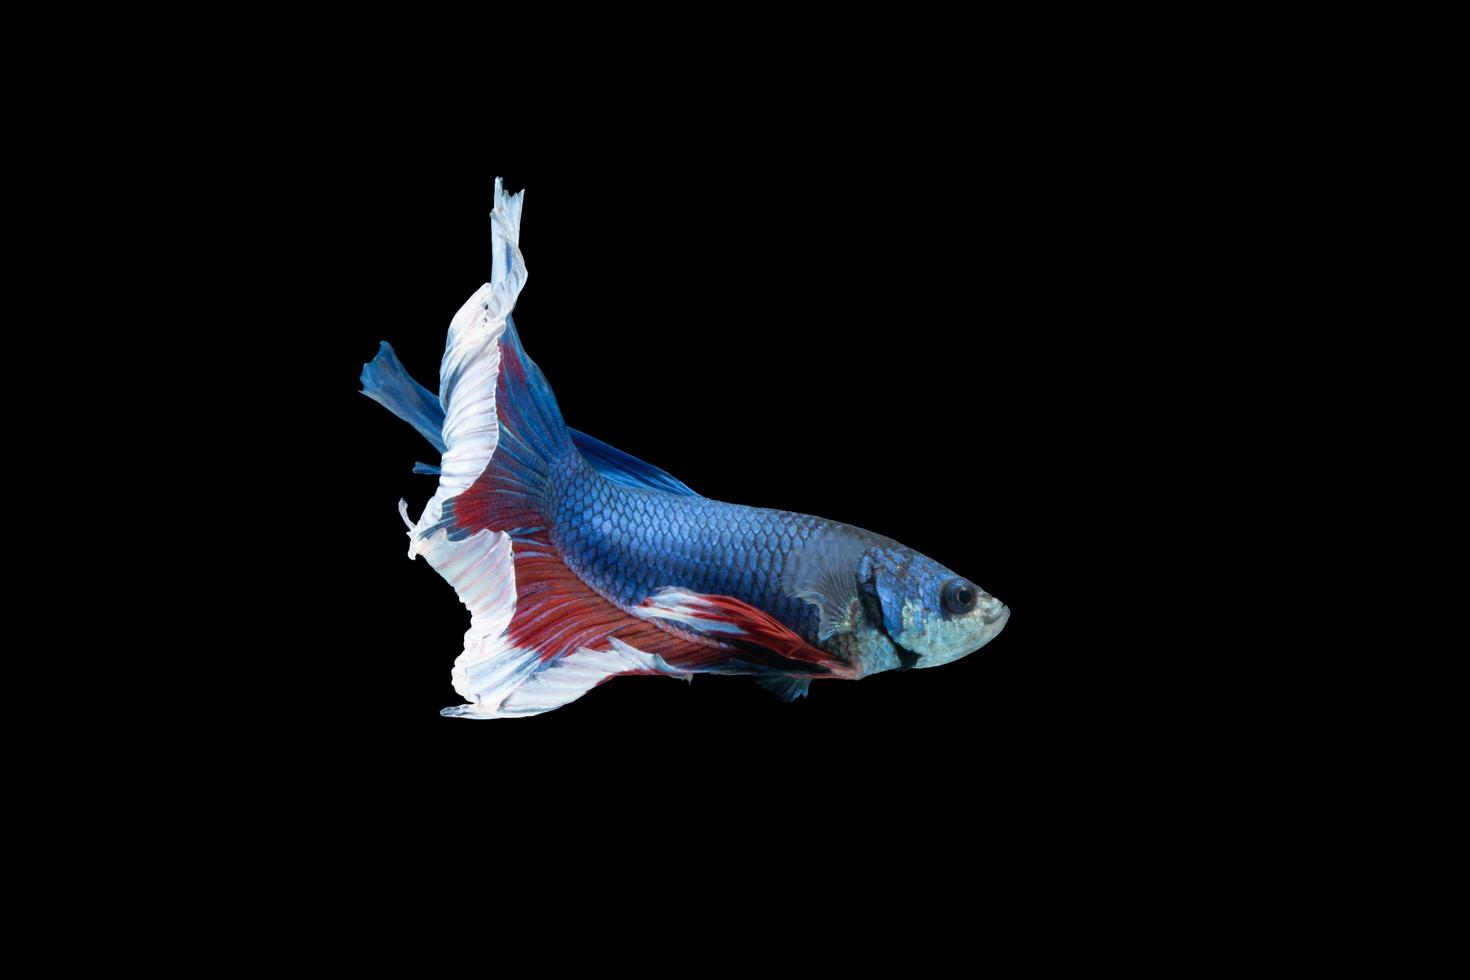 Halfmoon betta fish with blue and red stripes photo